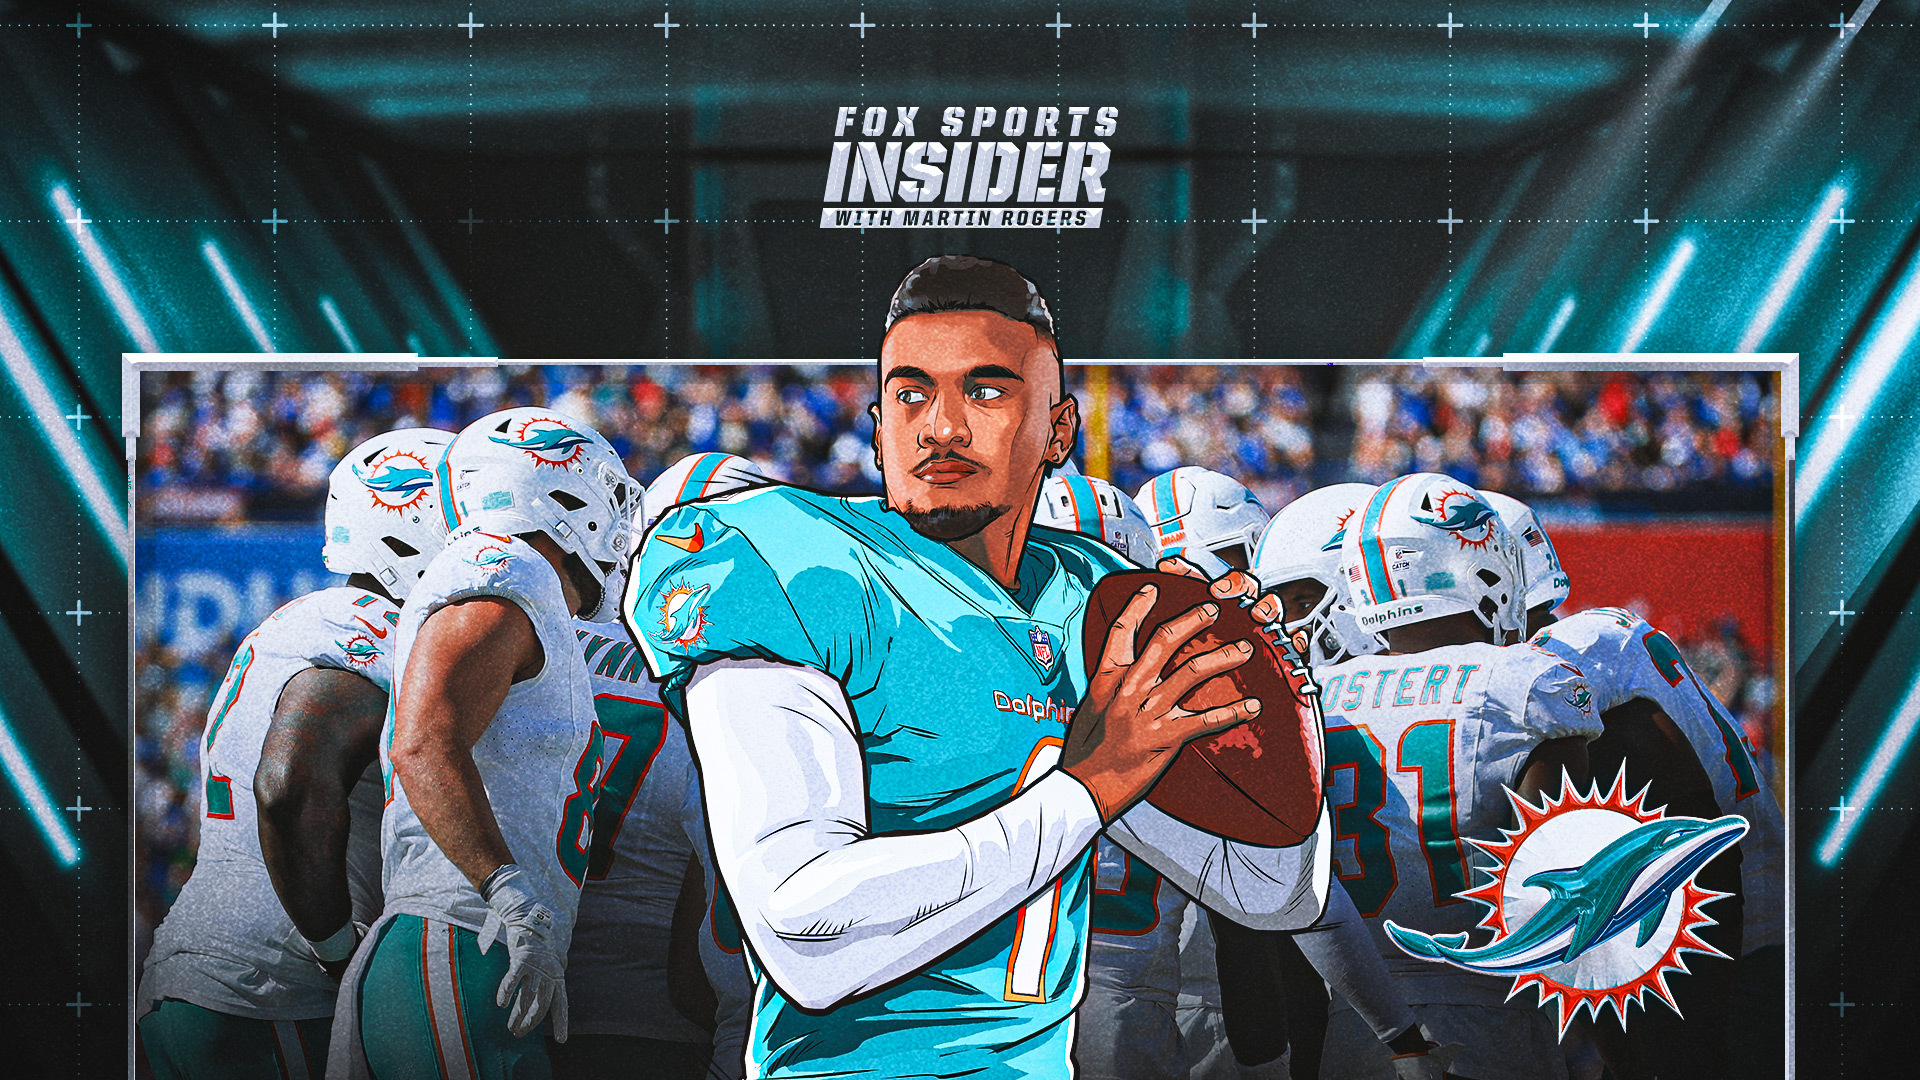 Tua Tagovailoa has been more assertive this season. It fits the Dolphins' new identity